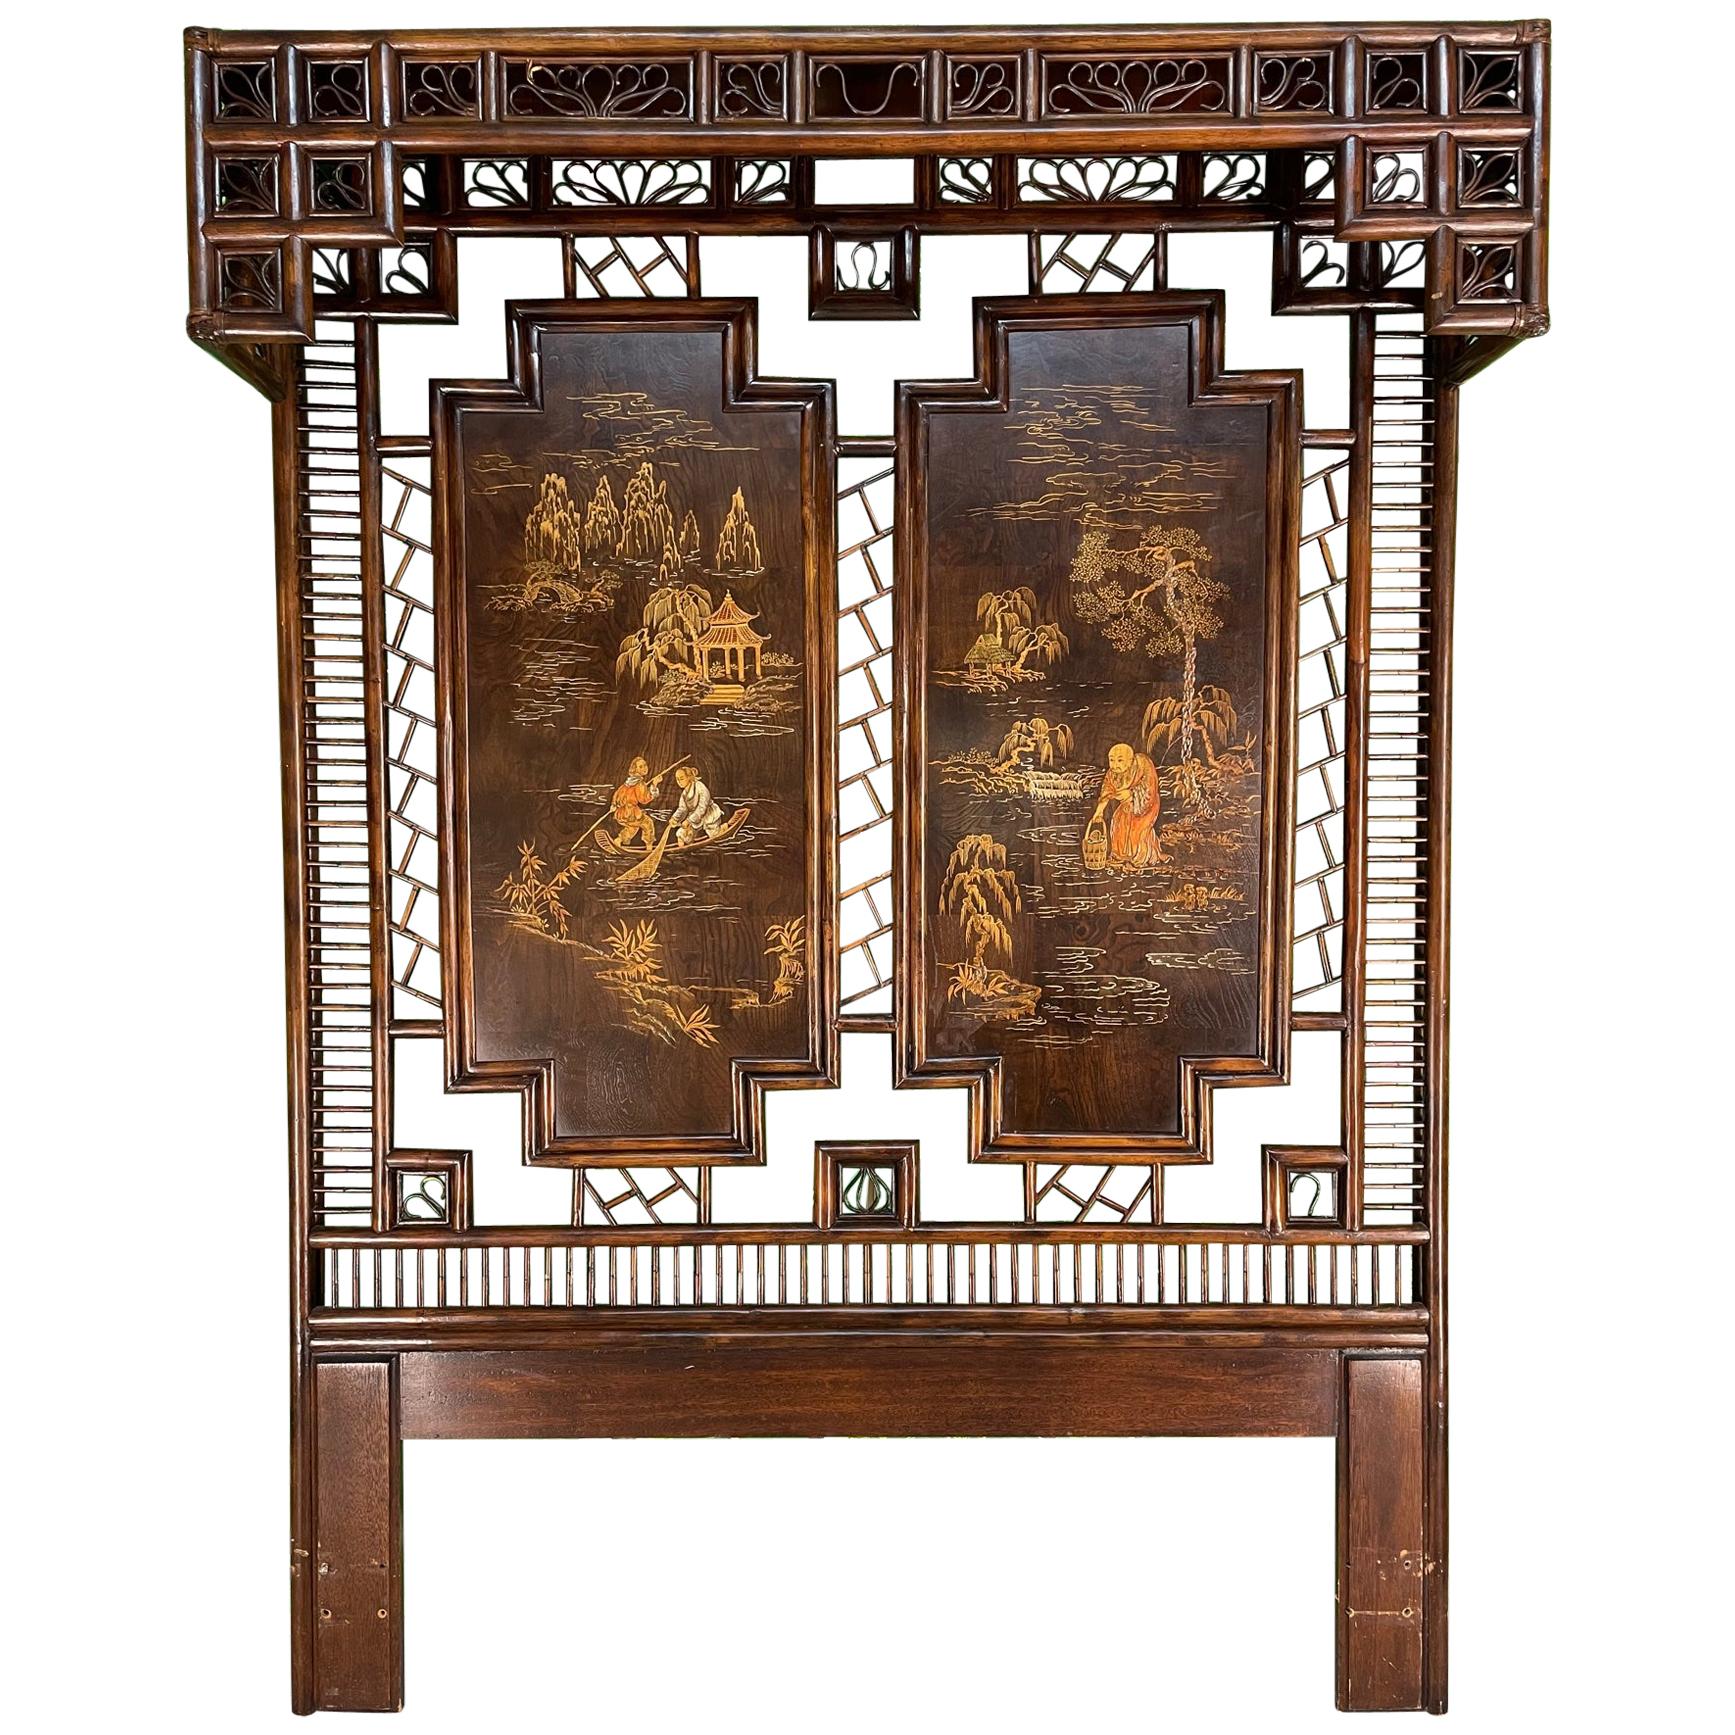 Asian Chinoiserie Rattan Canopy Queen Size Headboard by Henredon